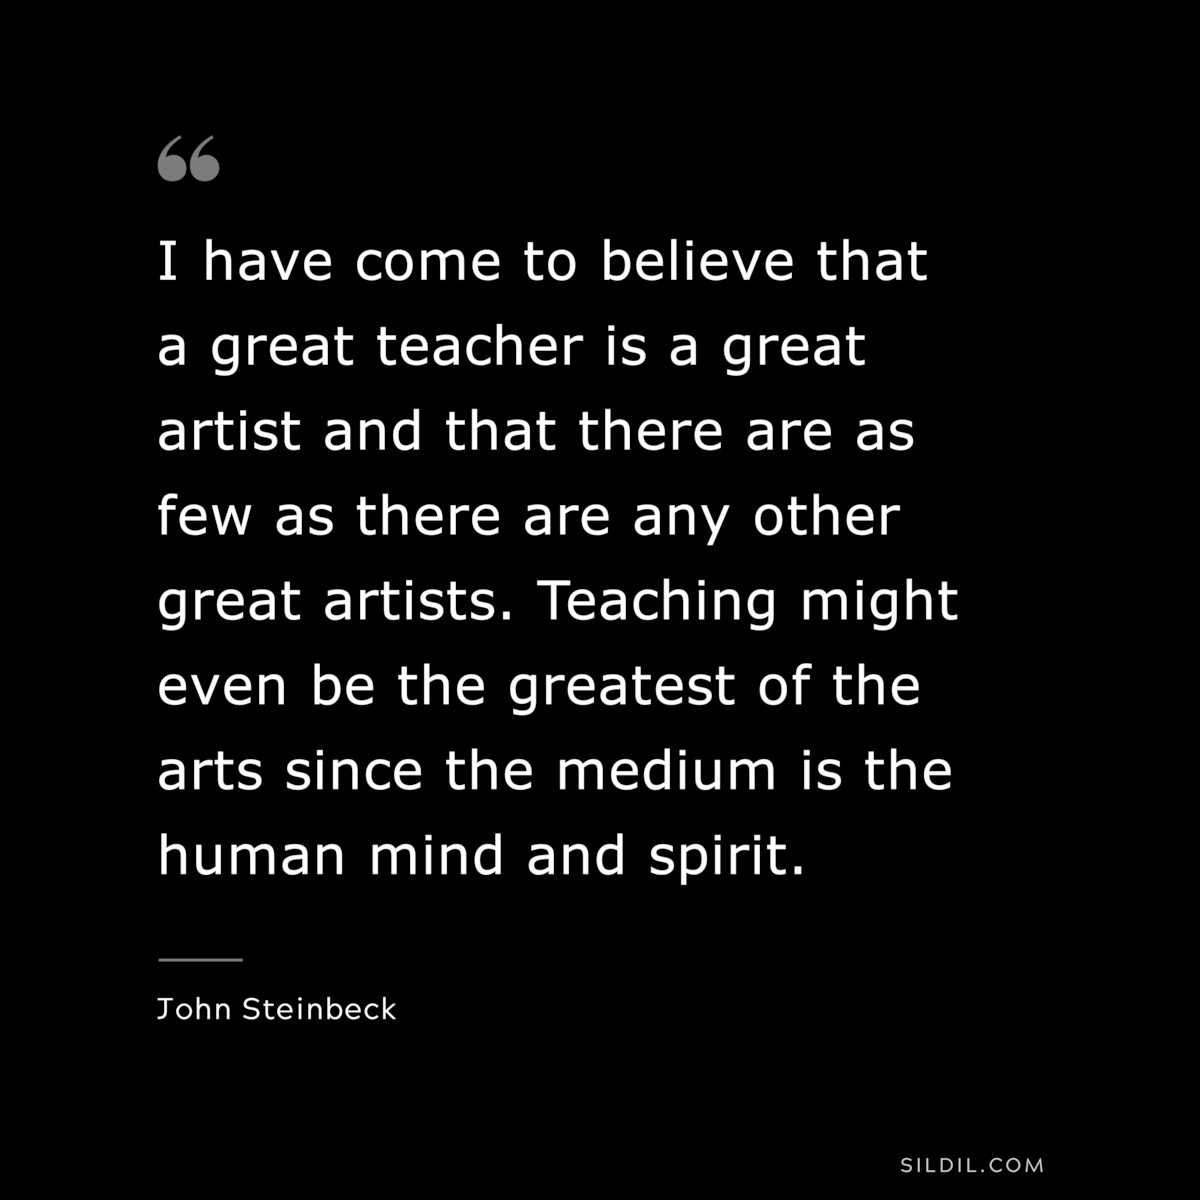 I have come to believe that a great teacher is a great artist and that there are as few as there are any other great artists. Teaching might even be the greatest of the arts since the medium is the human mind and spirit.― John Steinbeck